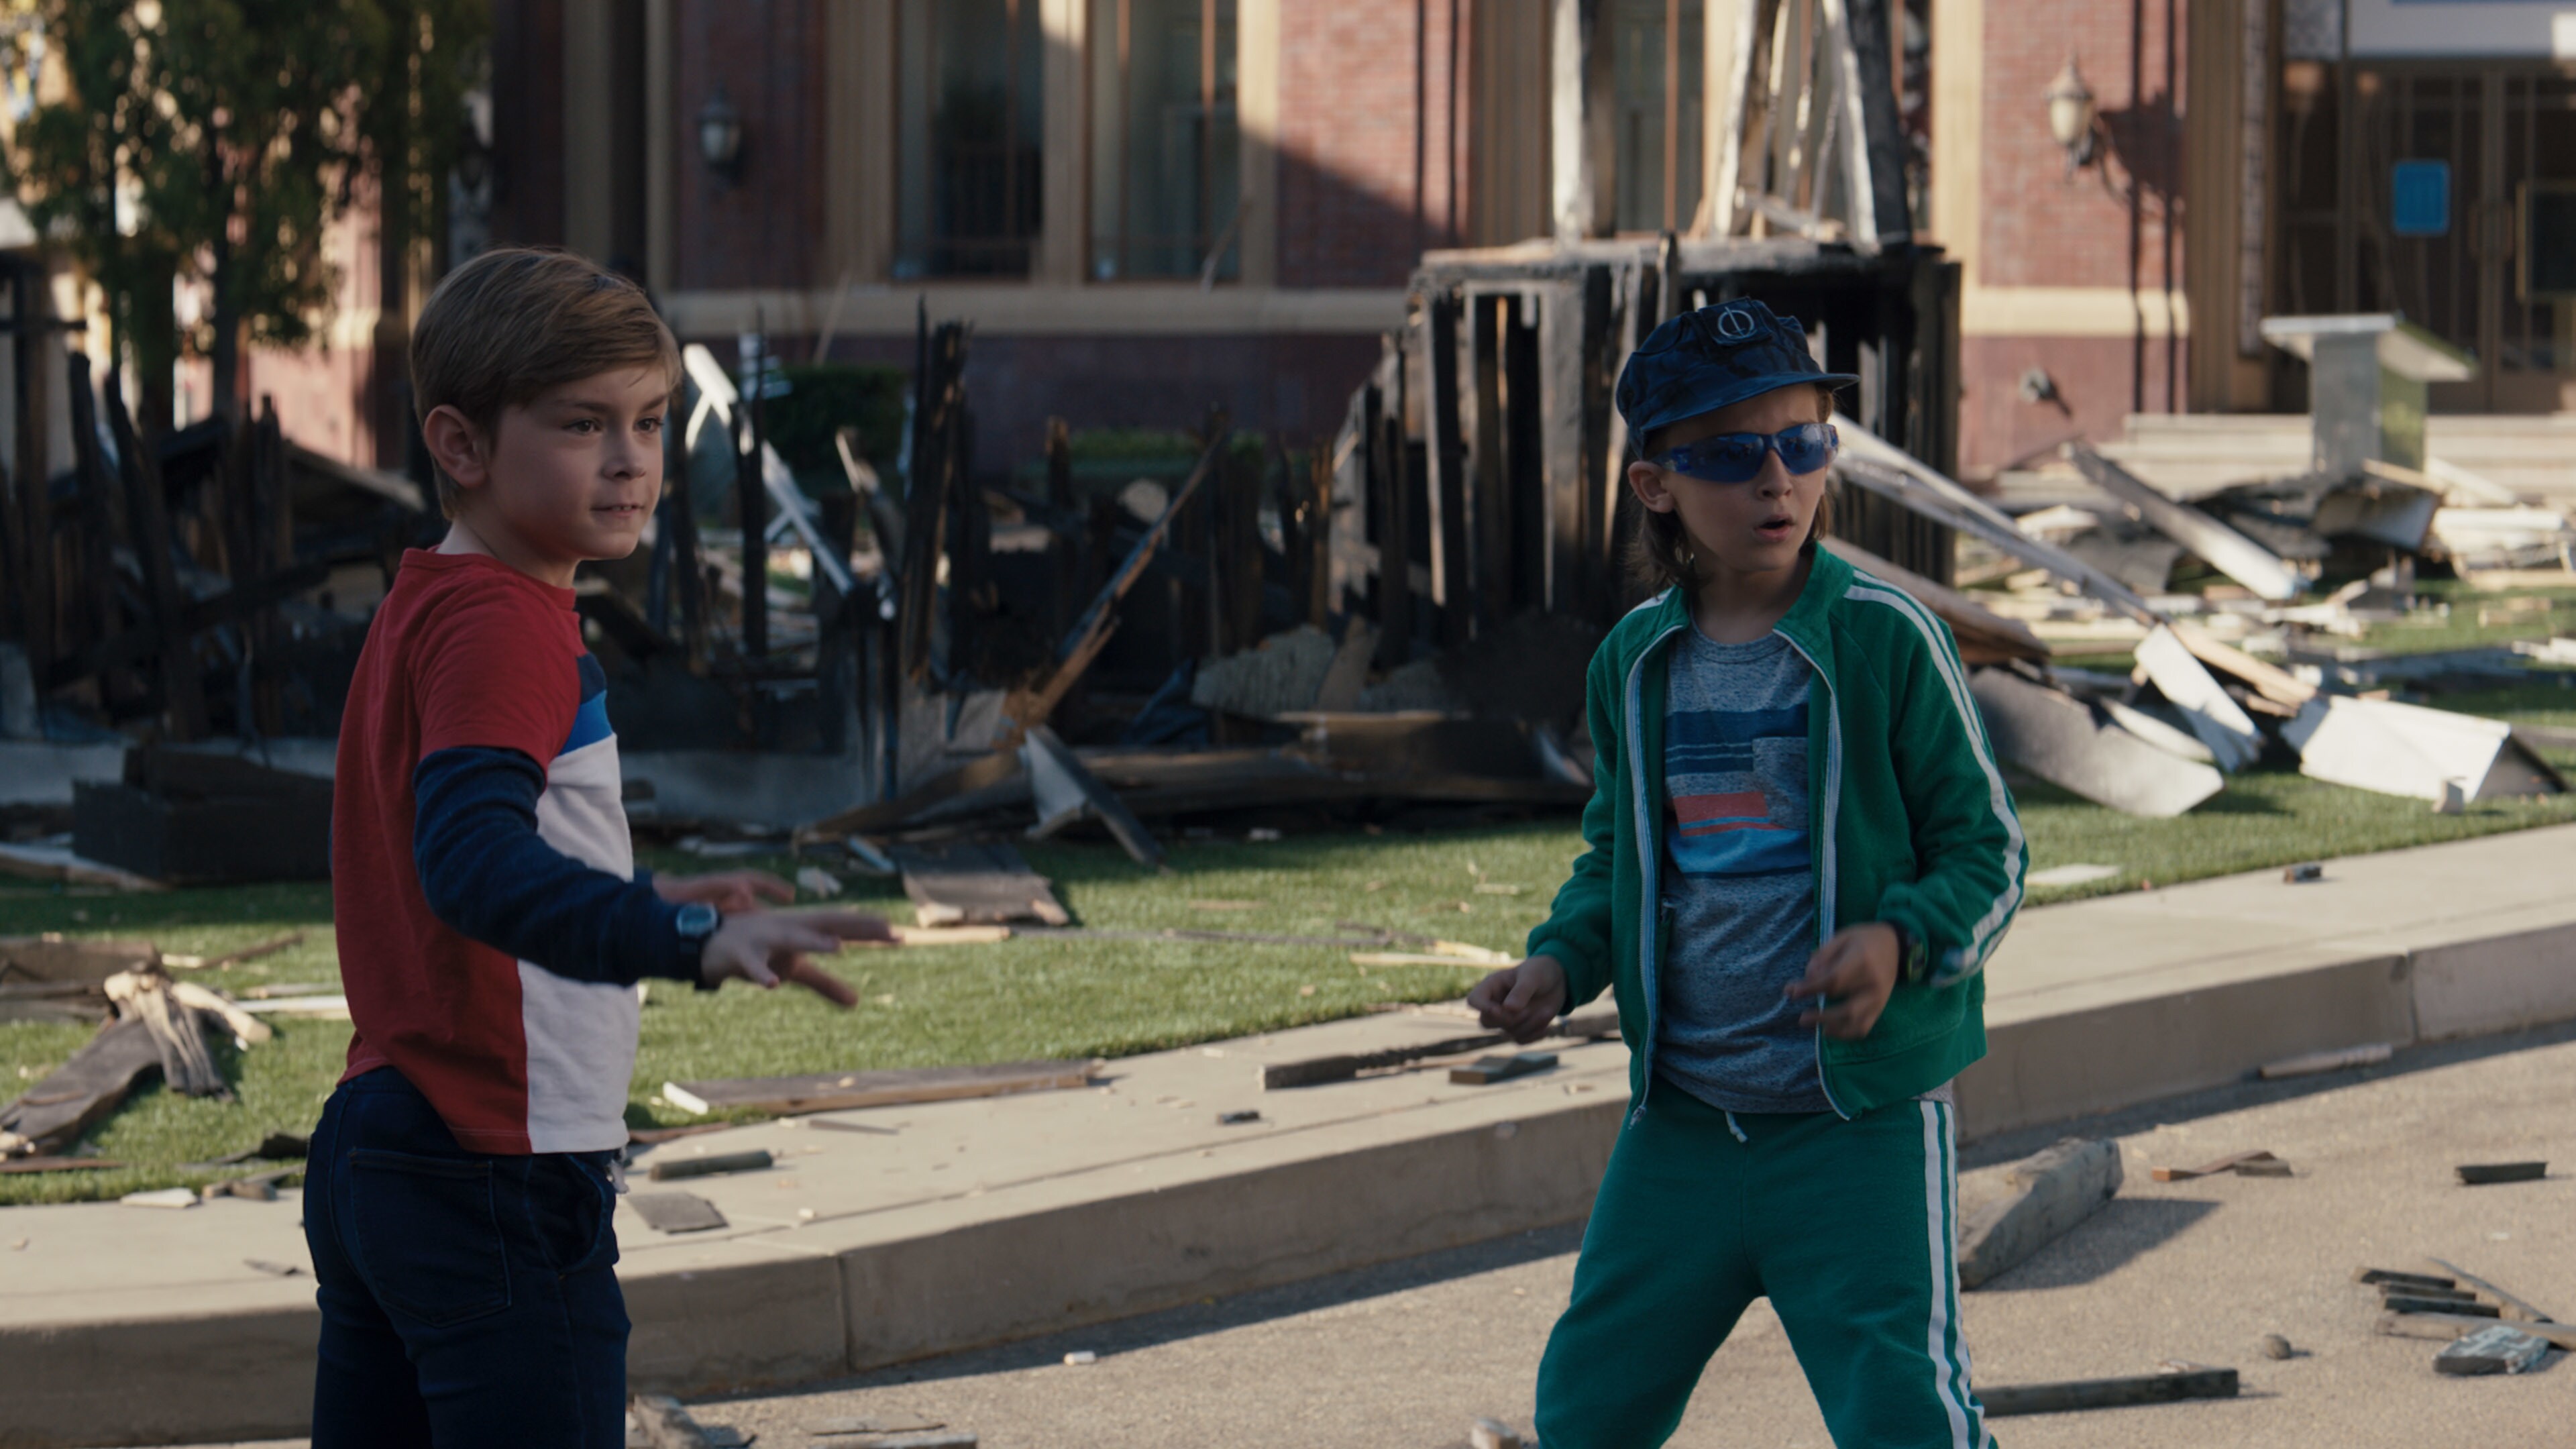 (L-R): Julian Hilliard as Billy and Jett Klyne as Tommy in Marvel Studios' WANDAVISION exclusively on Disney+. Photo courtesy of Marvel Studios. ©Marvel Studios 2021. All Rights Reserved.